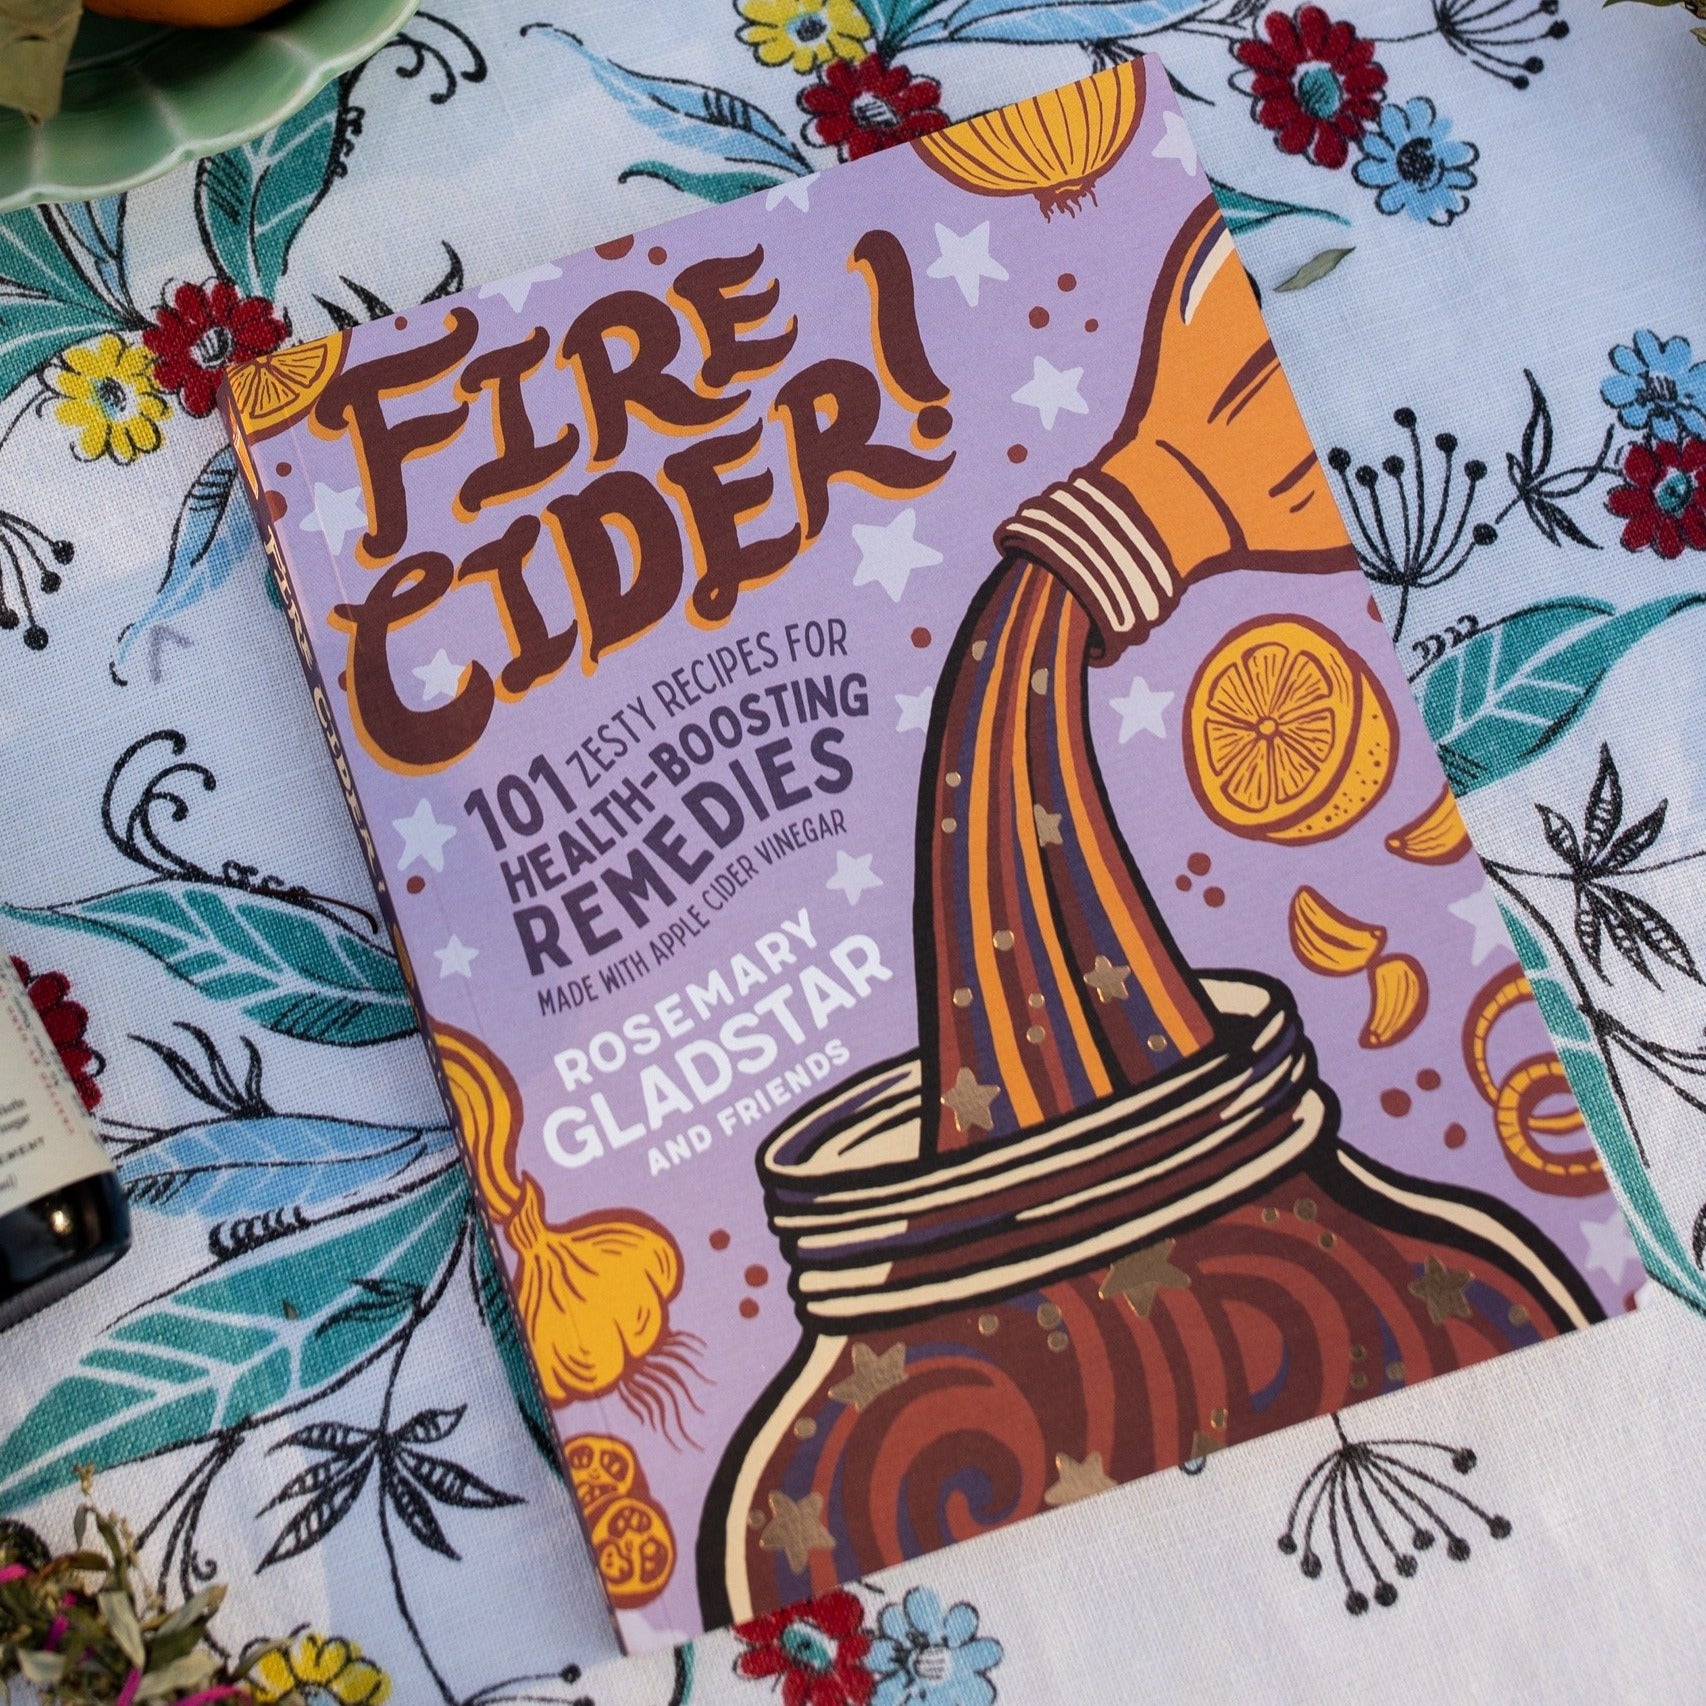 Fire Cider book by Rosemary Gladstar and Friends